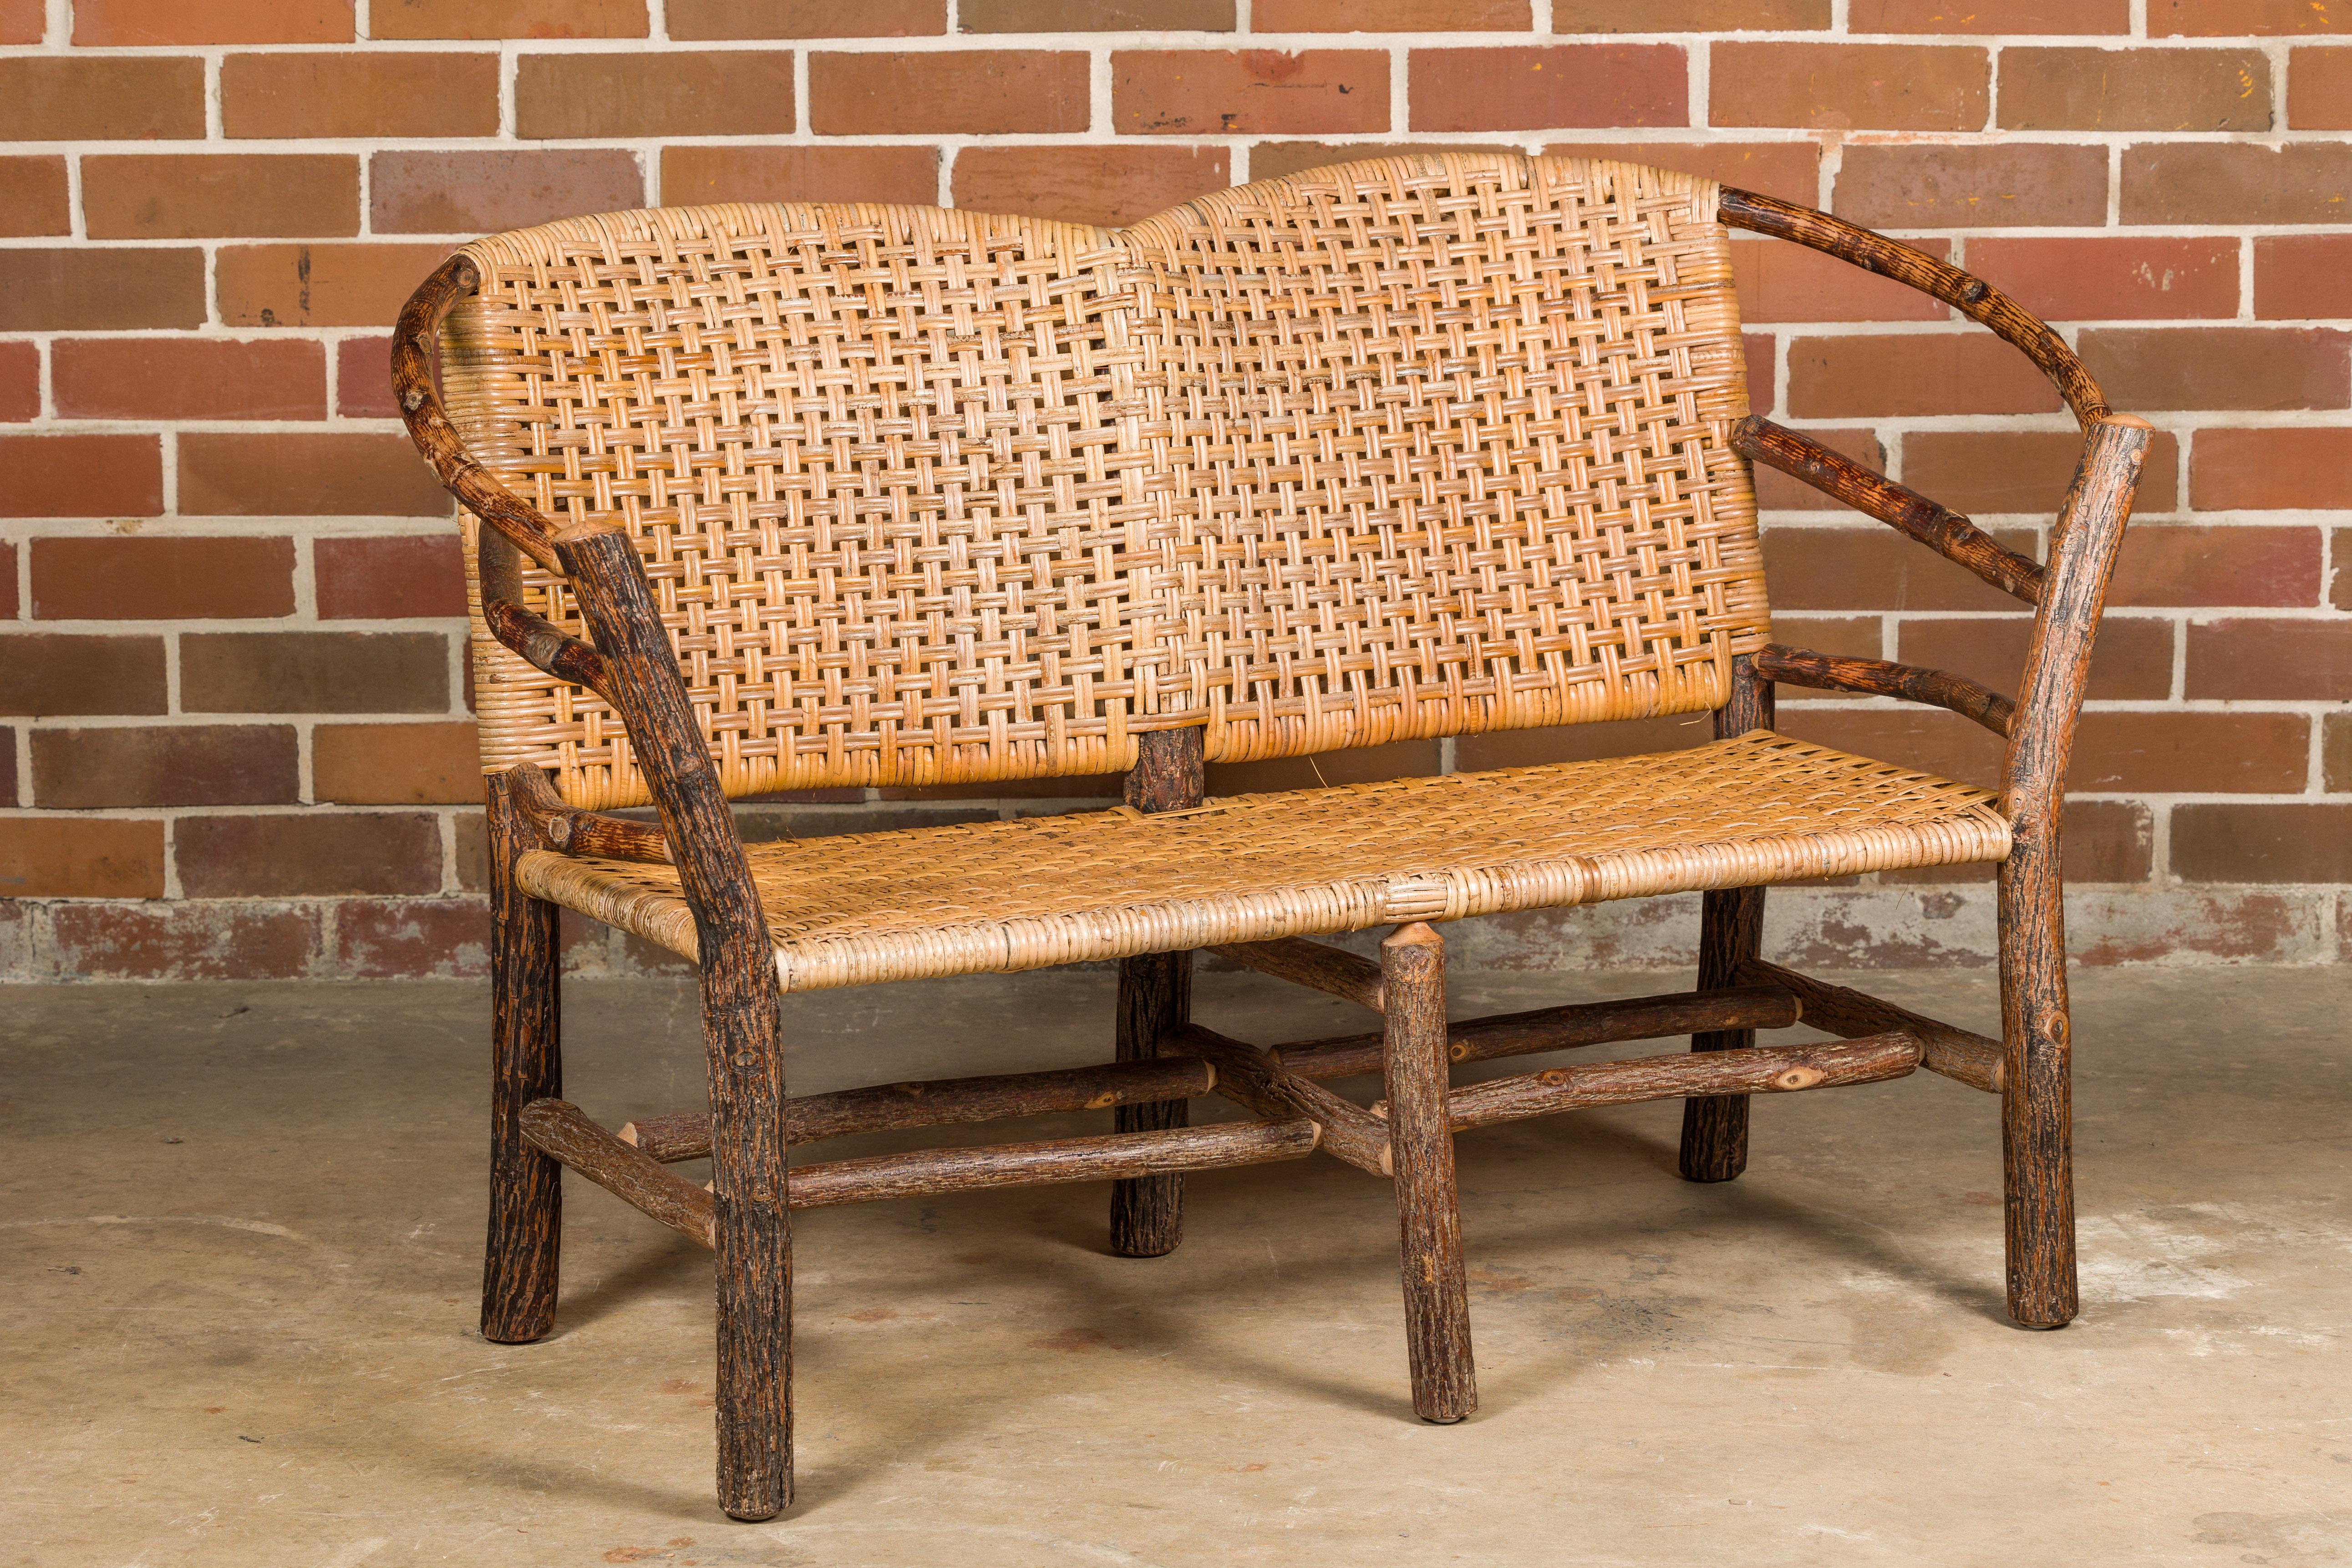 Rustic Vintage Old Hickory Hoop Settee with Woven Rattan Back and Seat For Sale